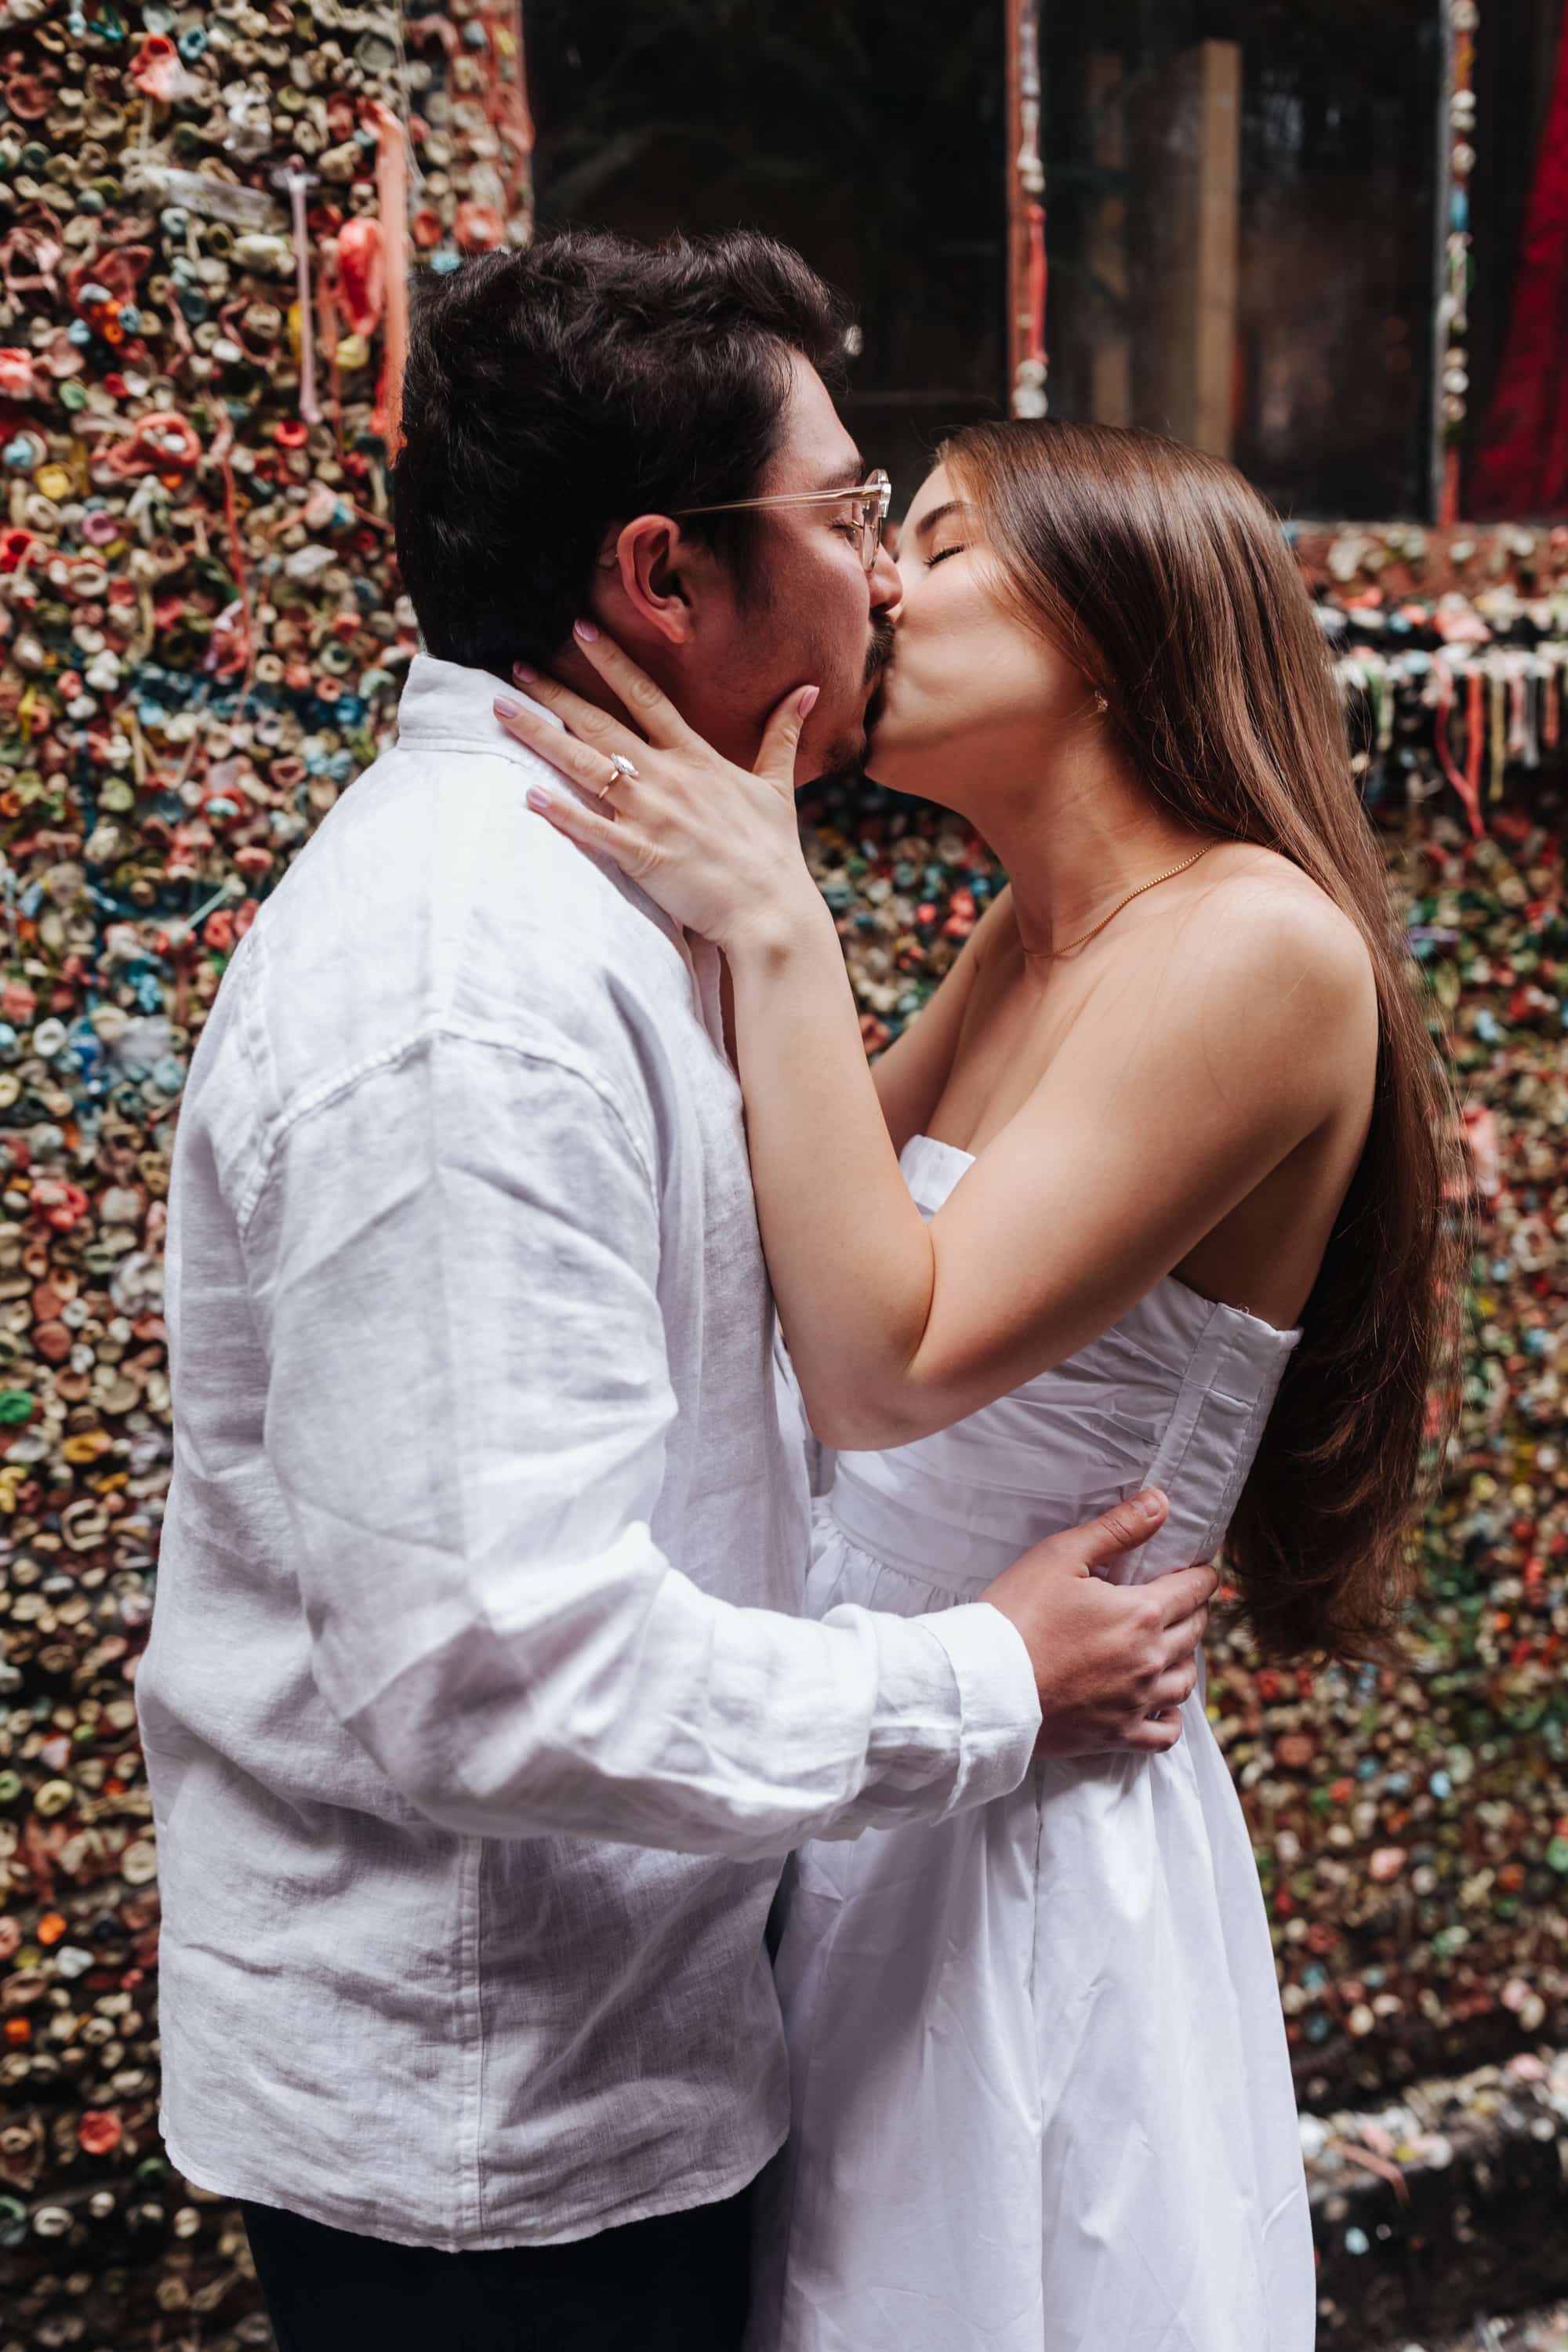 Seattle engagements, downtown Seattle engagements, gum wall seattle, gum wall engagement photos, seattle engagement photographer, seattle city engagements, urban seattle engagements, white outfits engagements, white engagement outfits